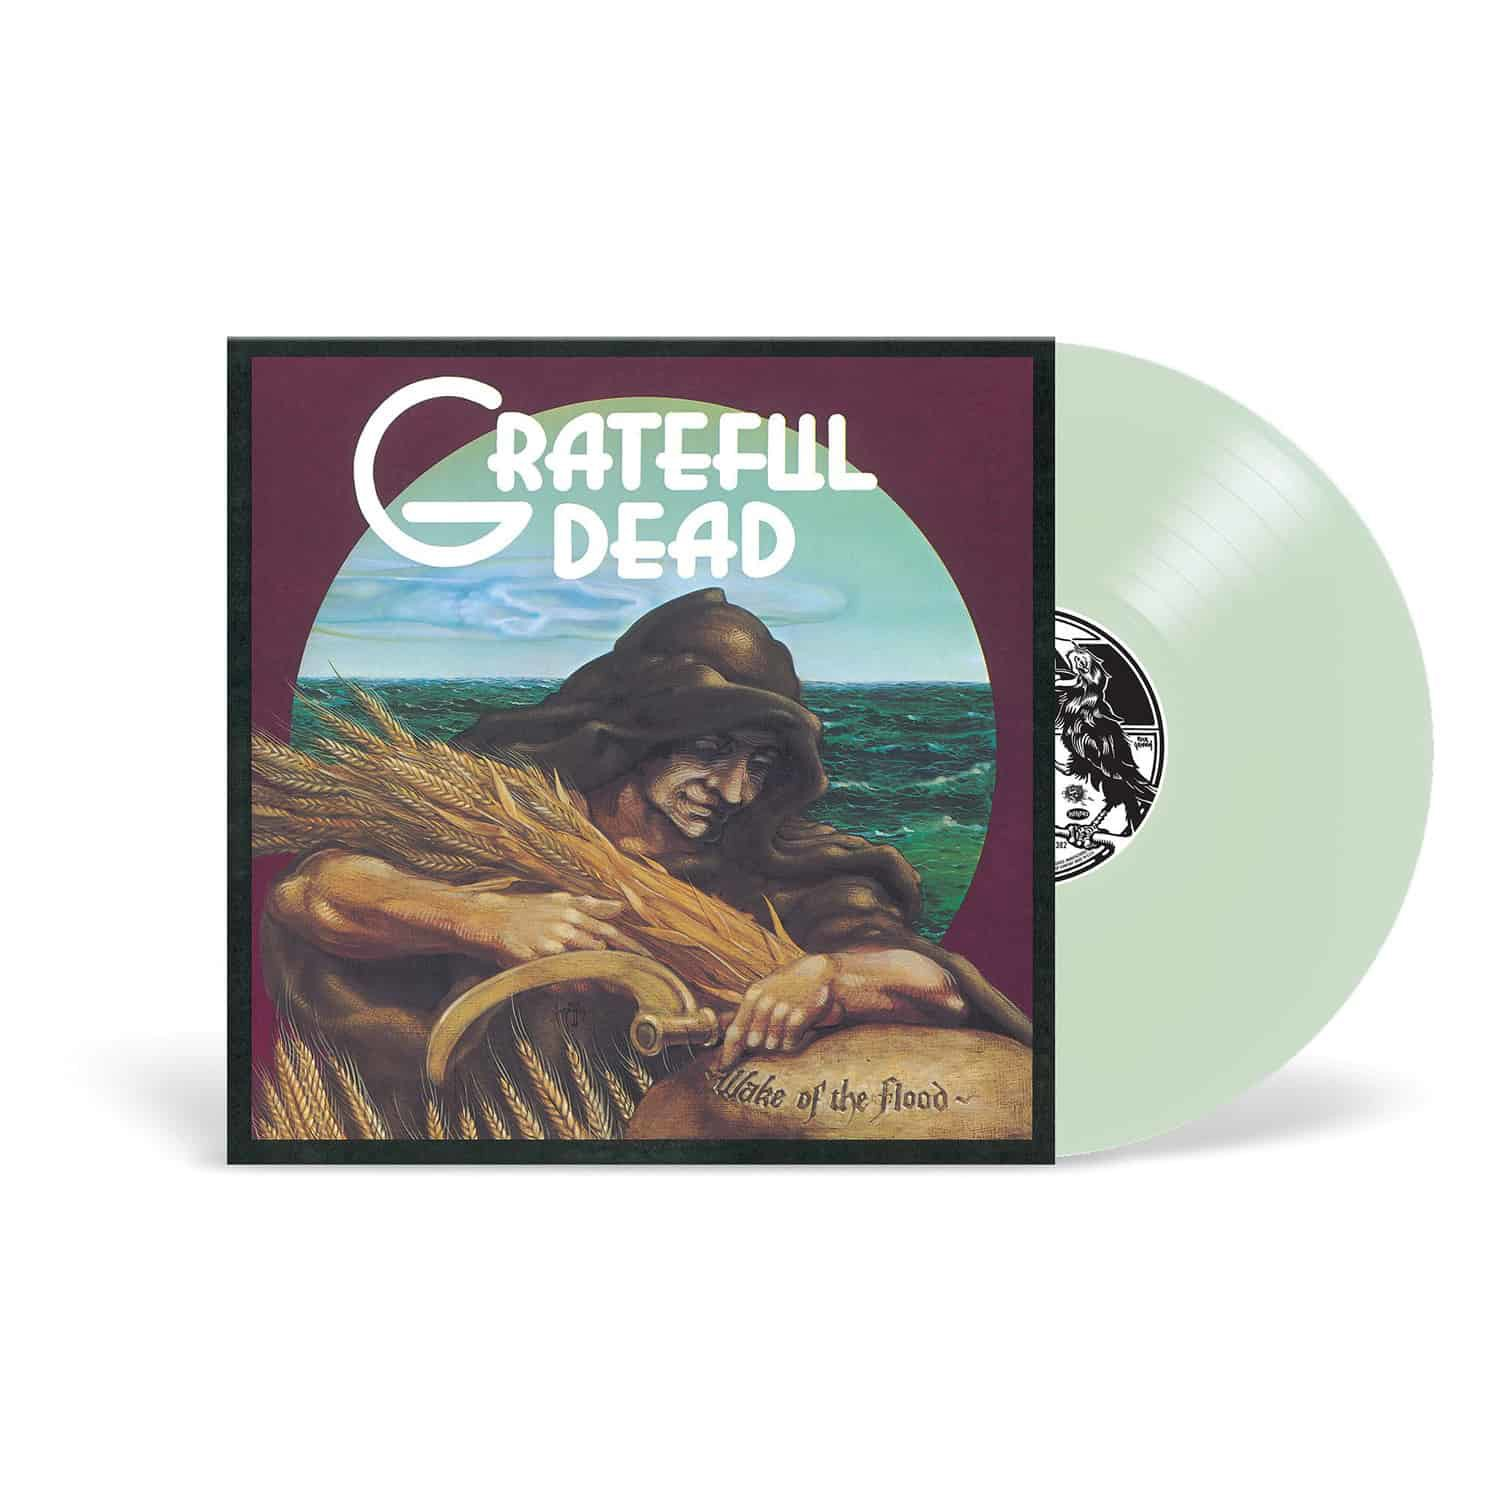 The Grateful Dead - Wake of the Flood (50th Anniversary Edition Cola-Bottle Clear Vinyl))